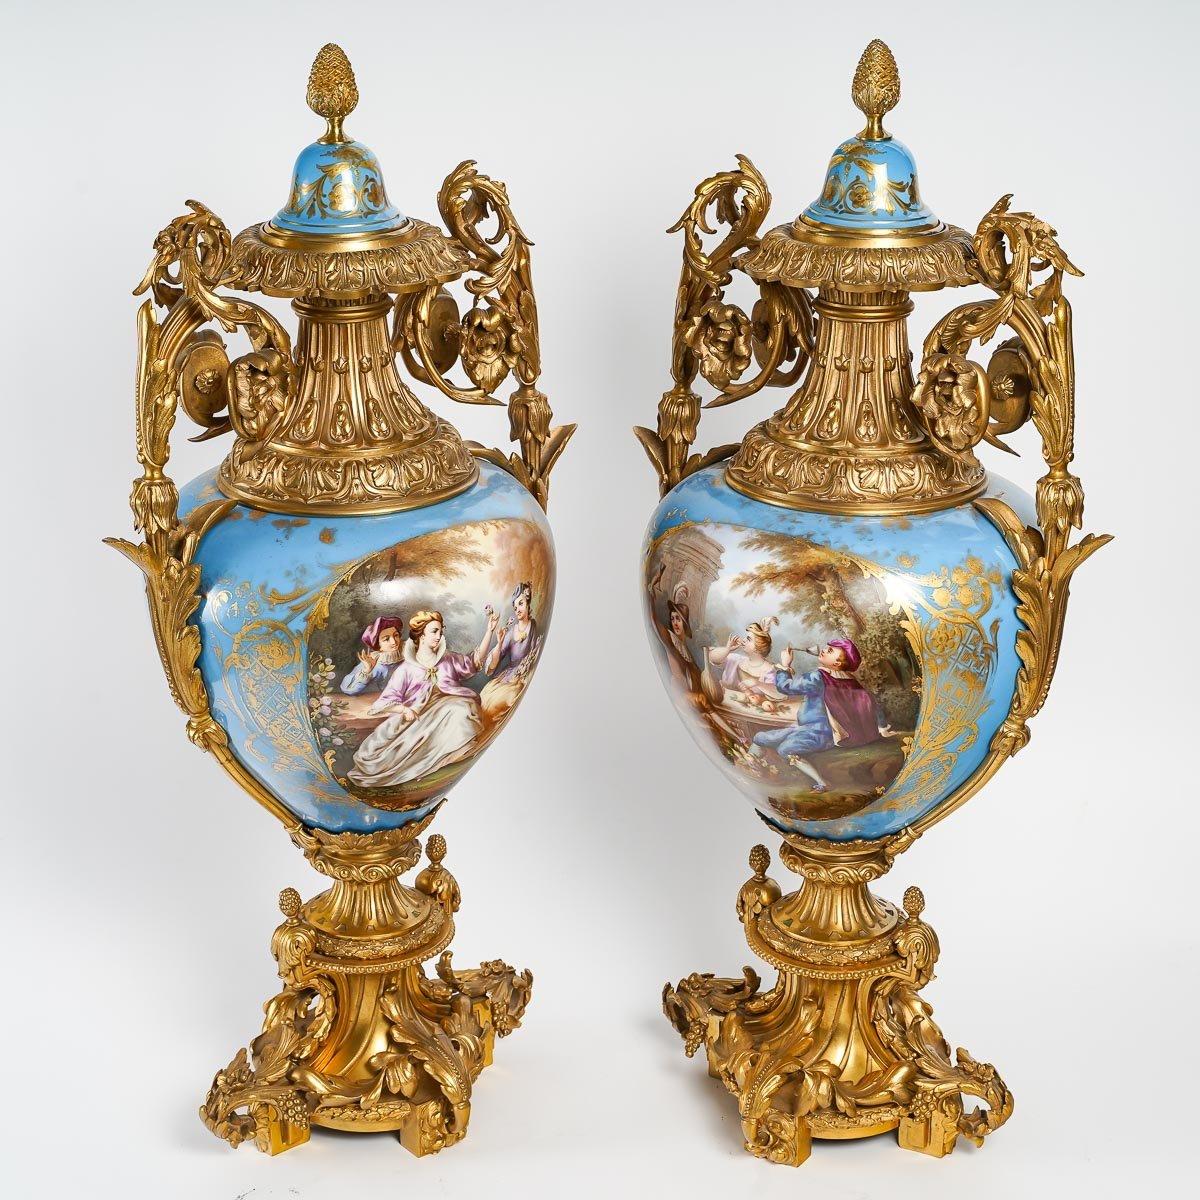 French Large Pair of Sèvres Porcelain Vases, Napoleon III Period